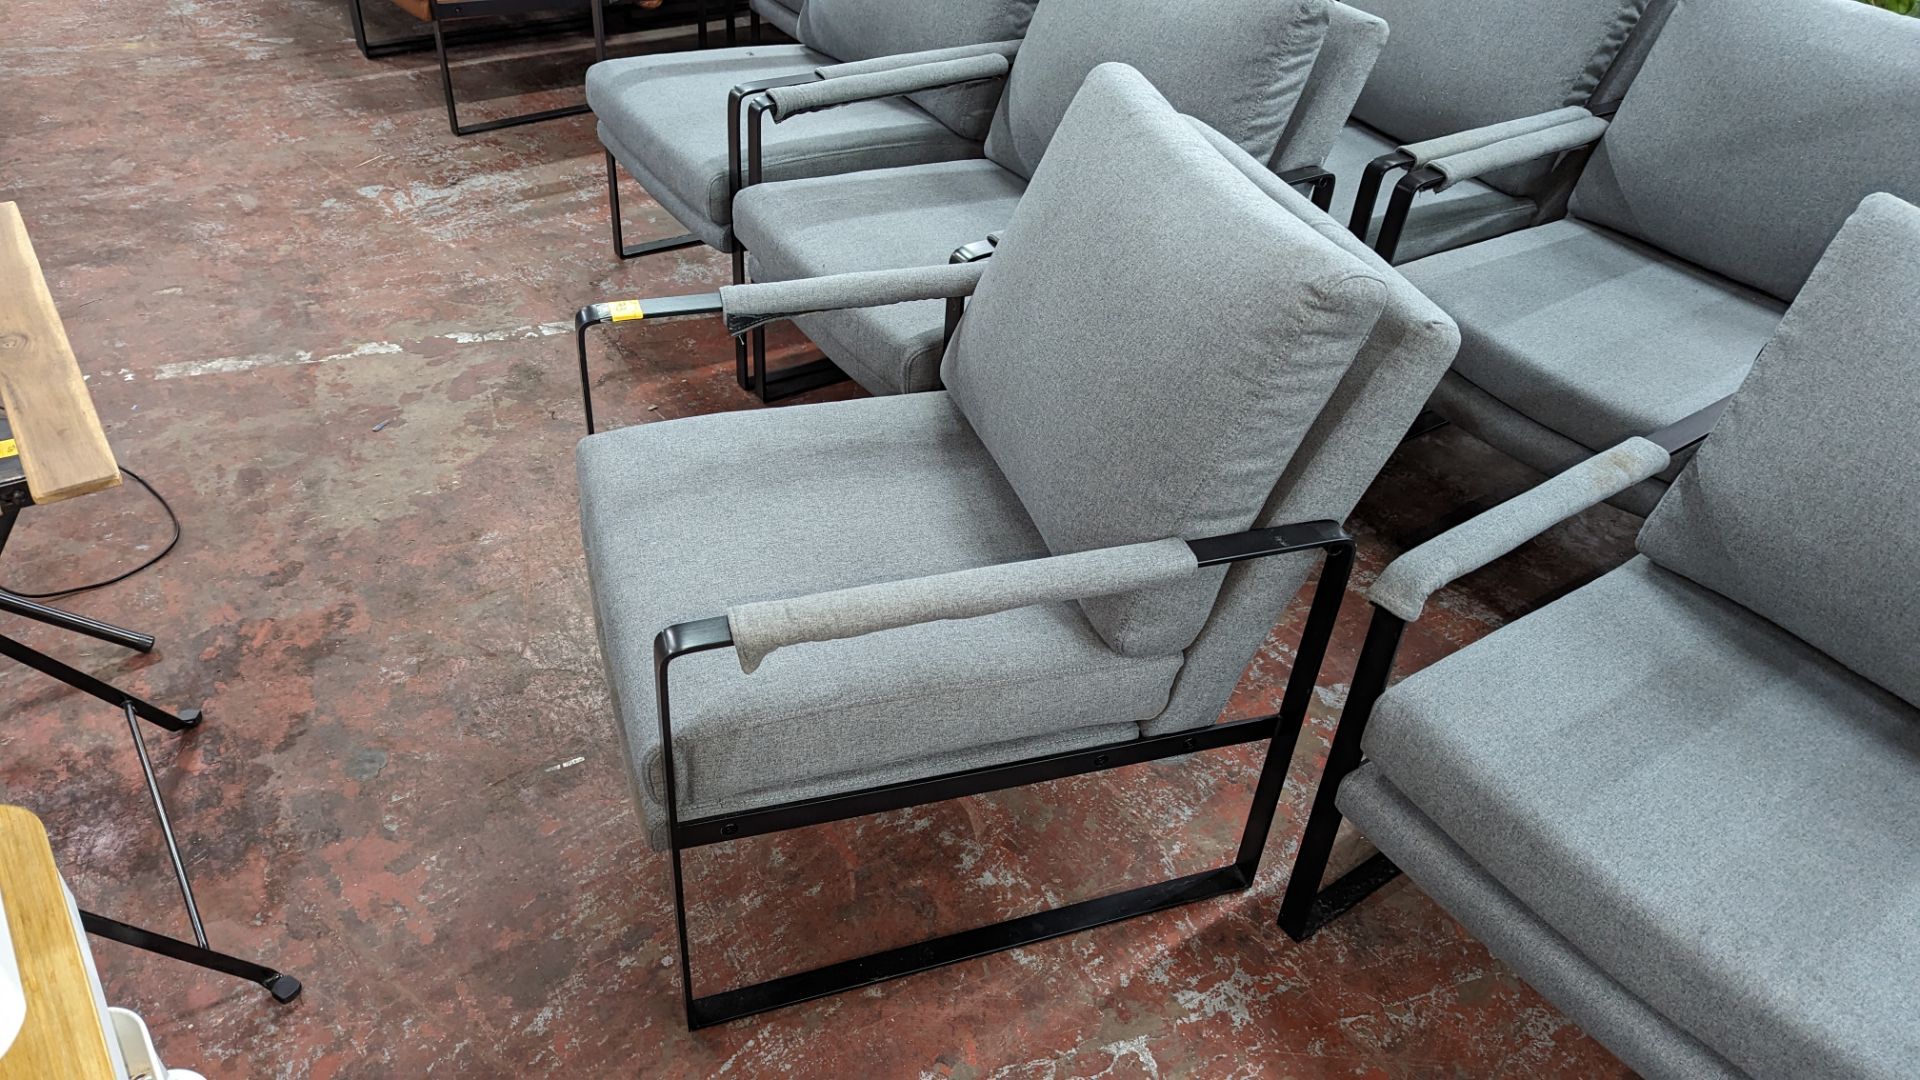 4 off matching chairs on heavy duty black metal frames. NB: The chairs forming lots 71 to 73 all u - Image 7 of 7